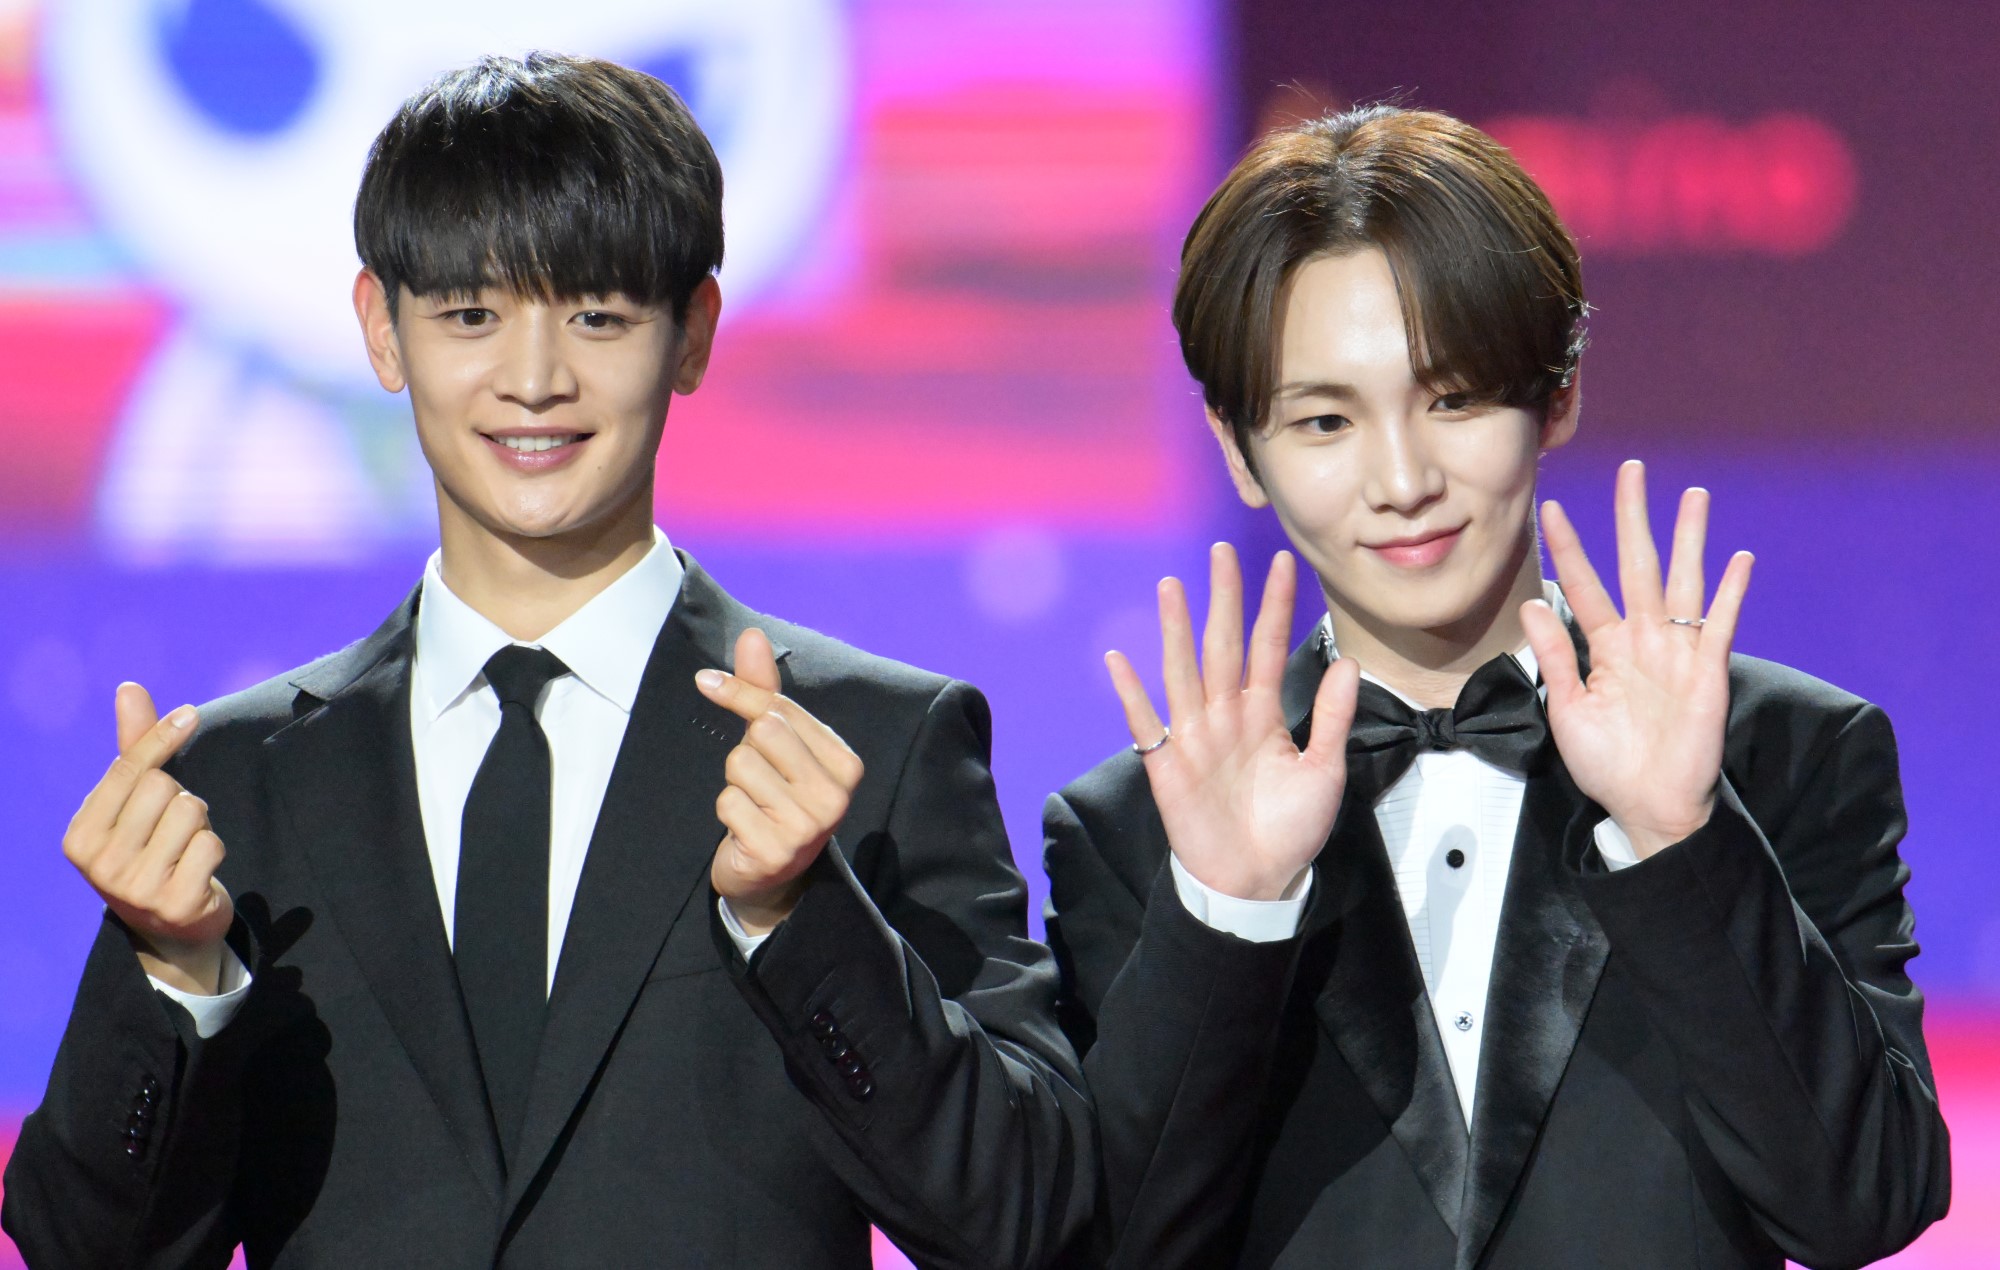 SHINee members Minho and Key renew their contracts with SM Entertainment